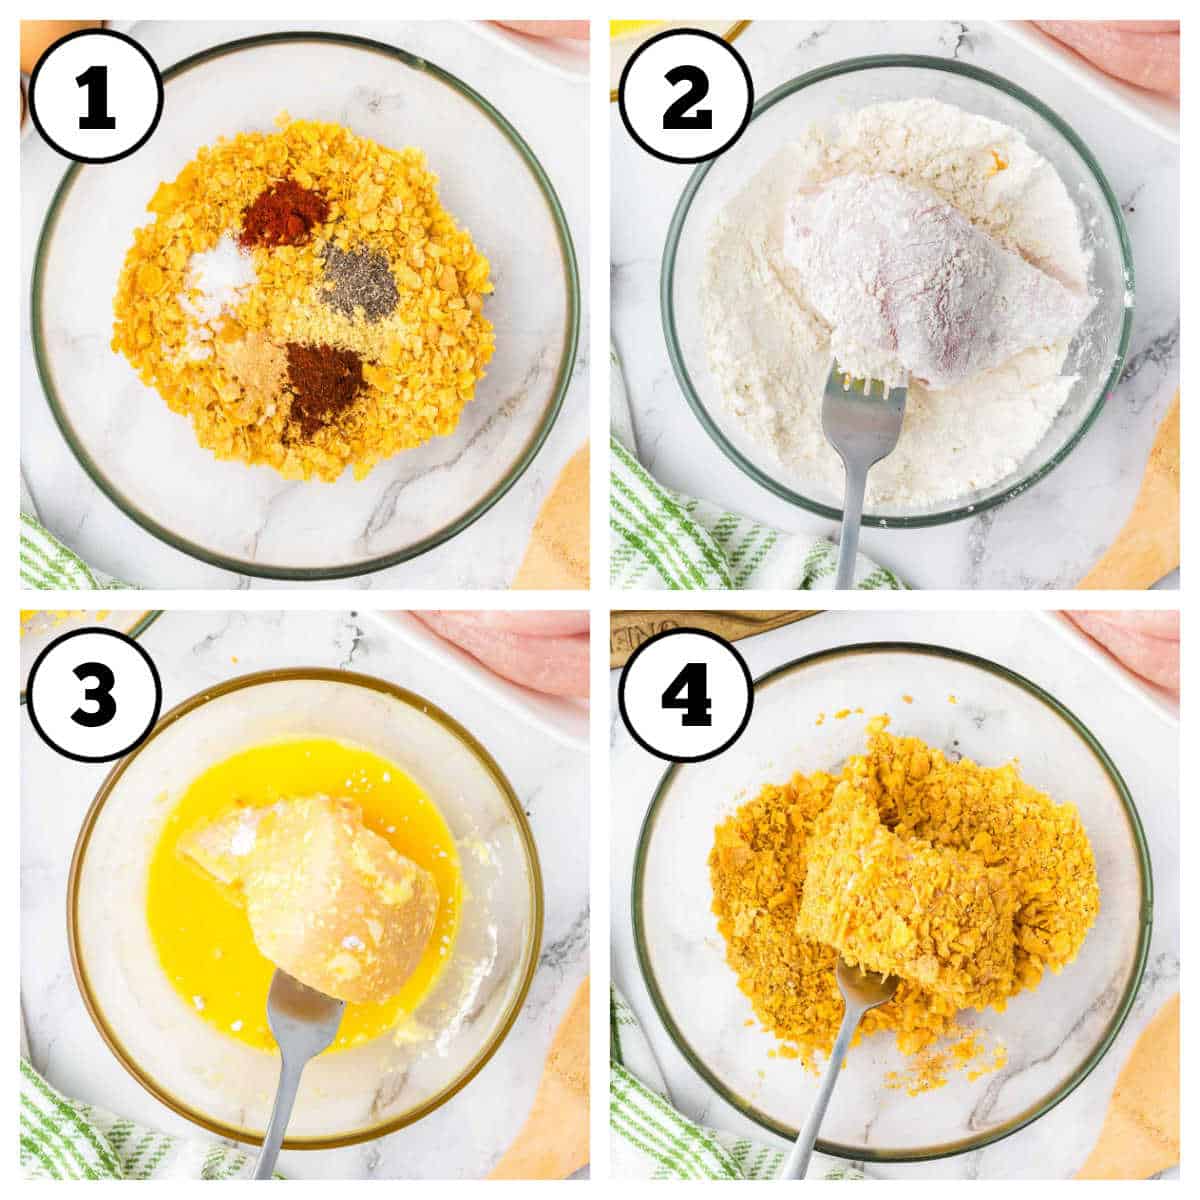 Steps 1-4 of how to make cornflake fried chicken.